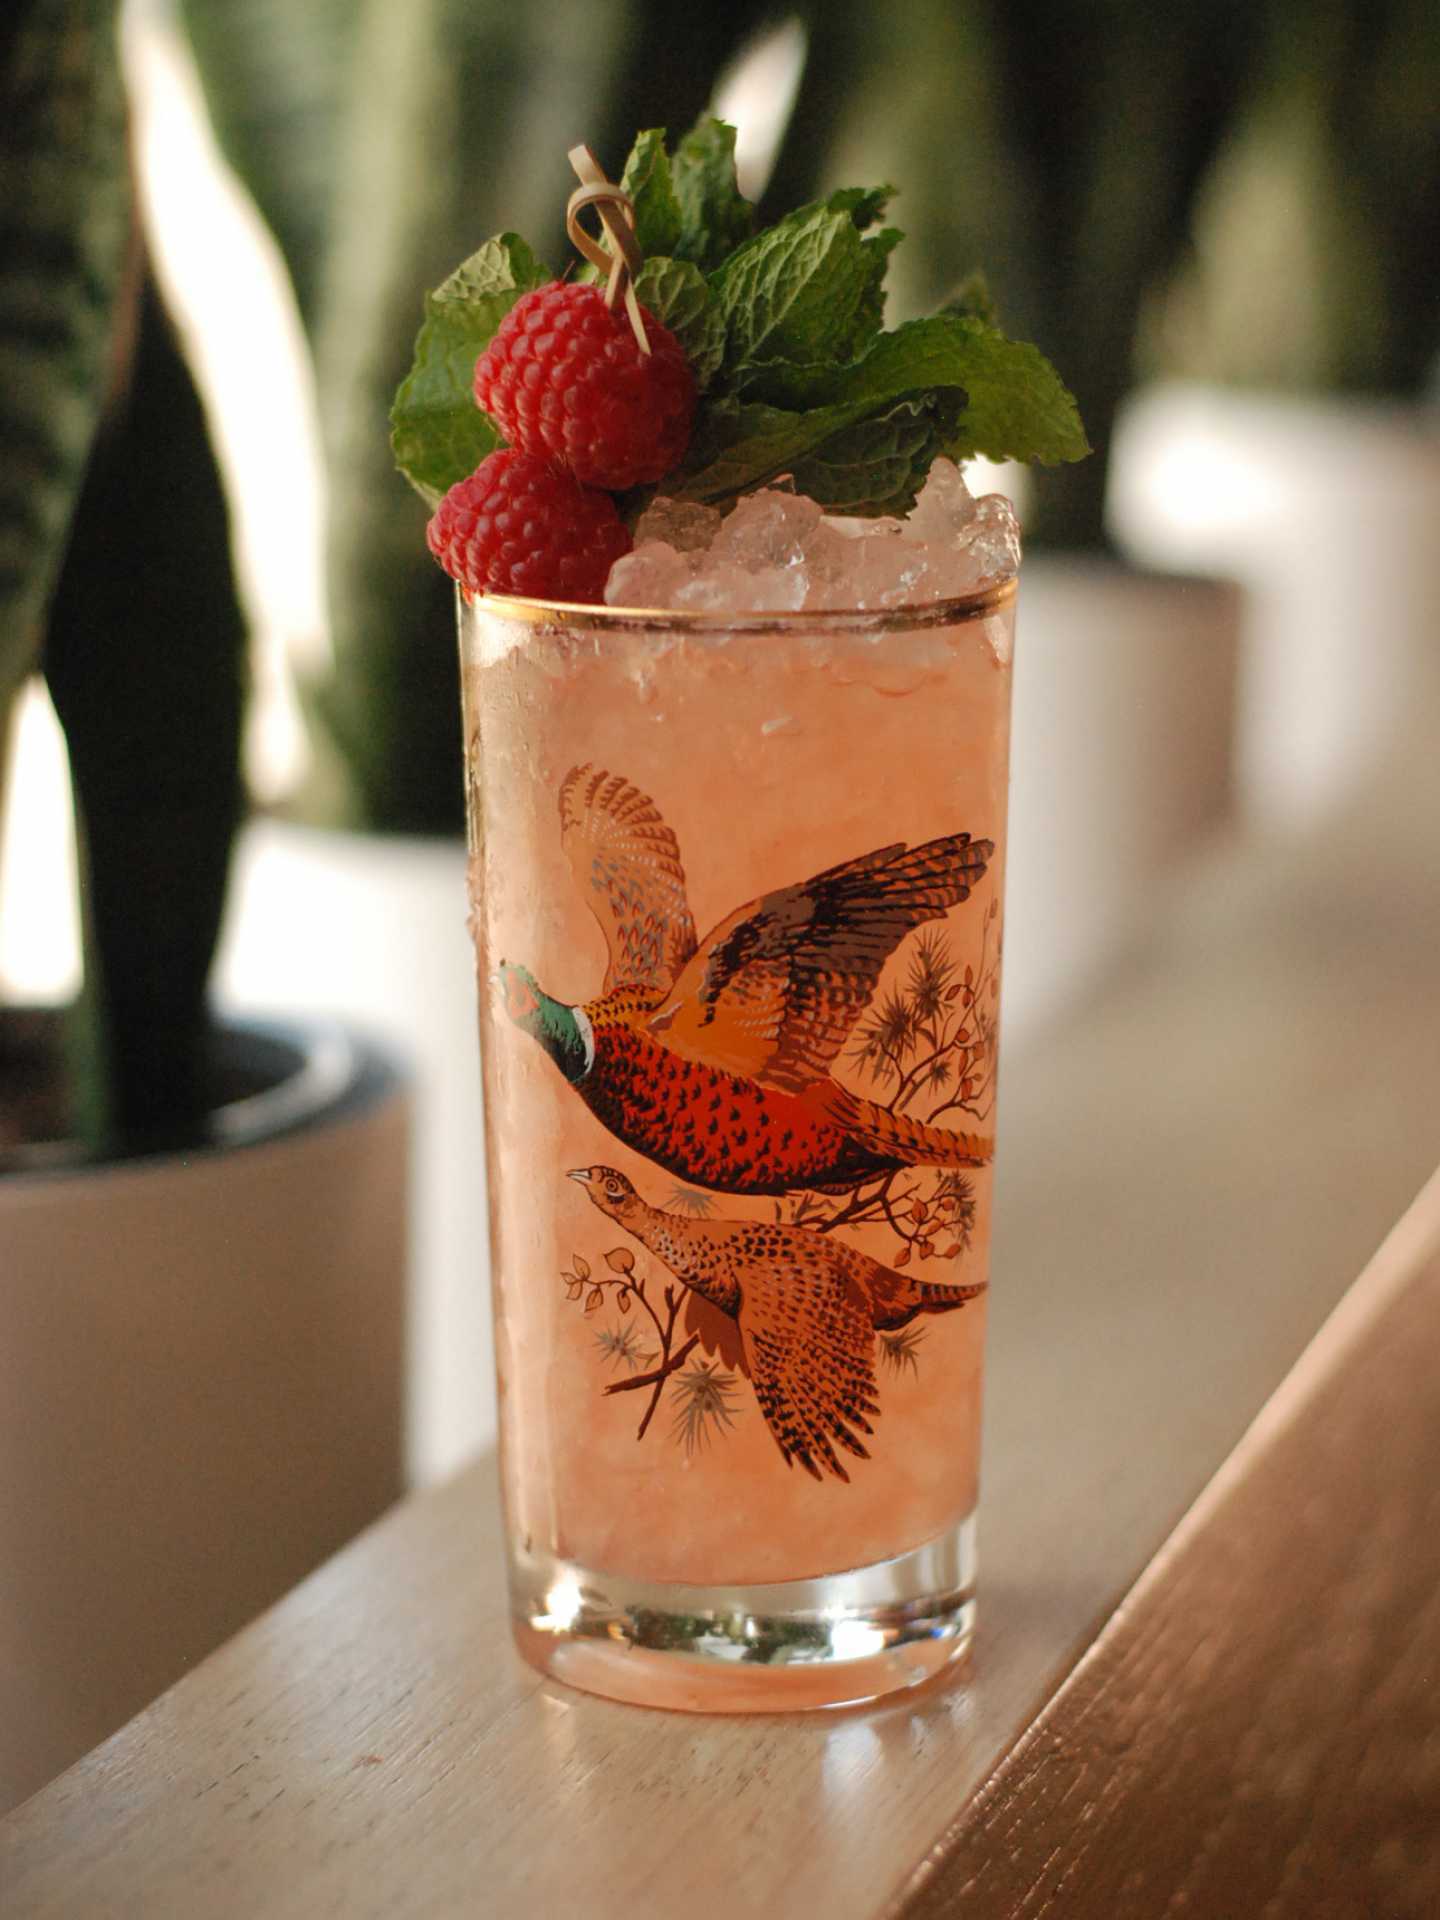 Best cocktail bars in Toronto | A tropical-looking cocktail at Cocktail Bar